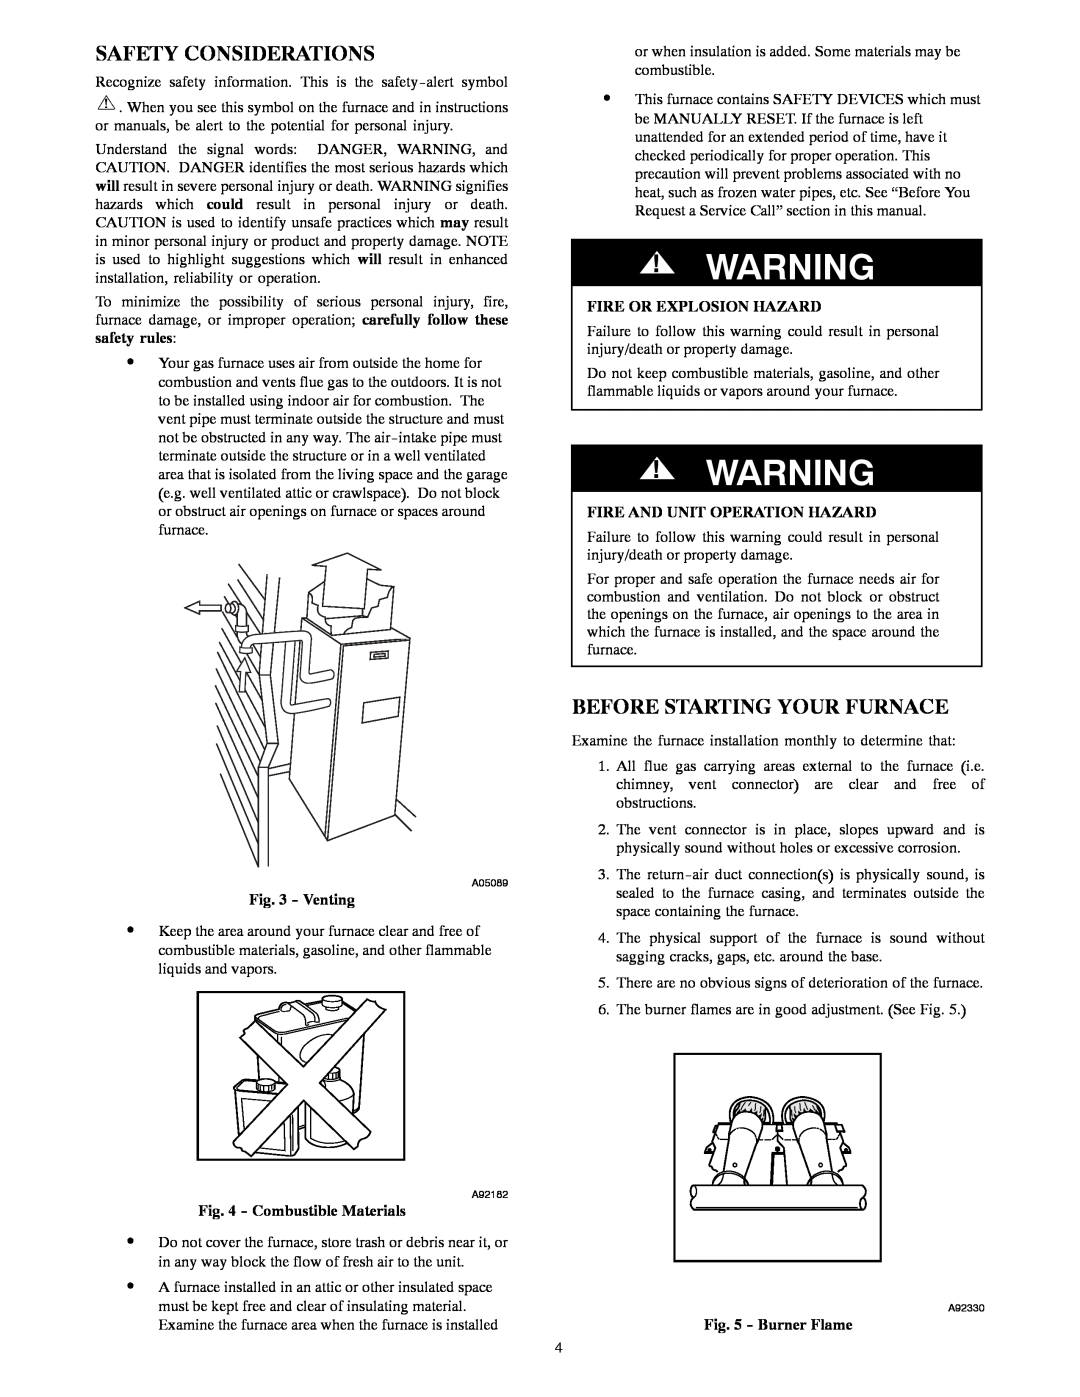 Bryant 355CAV Safety Considerations, Before Starting Your Furnace, Venting, Combustible Materials, Burner Flame 